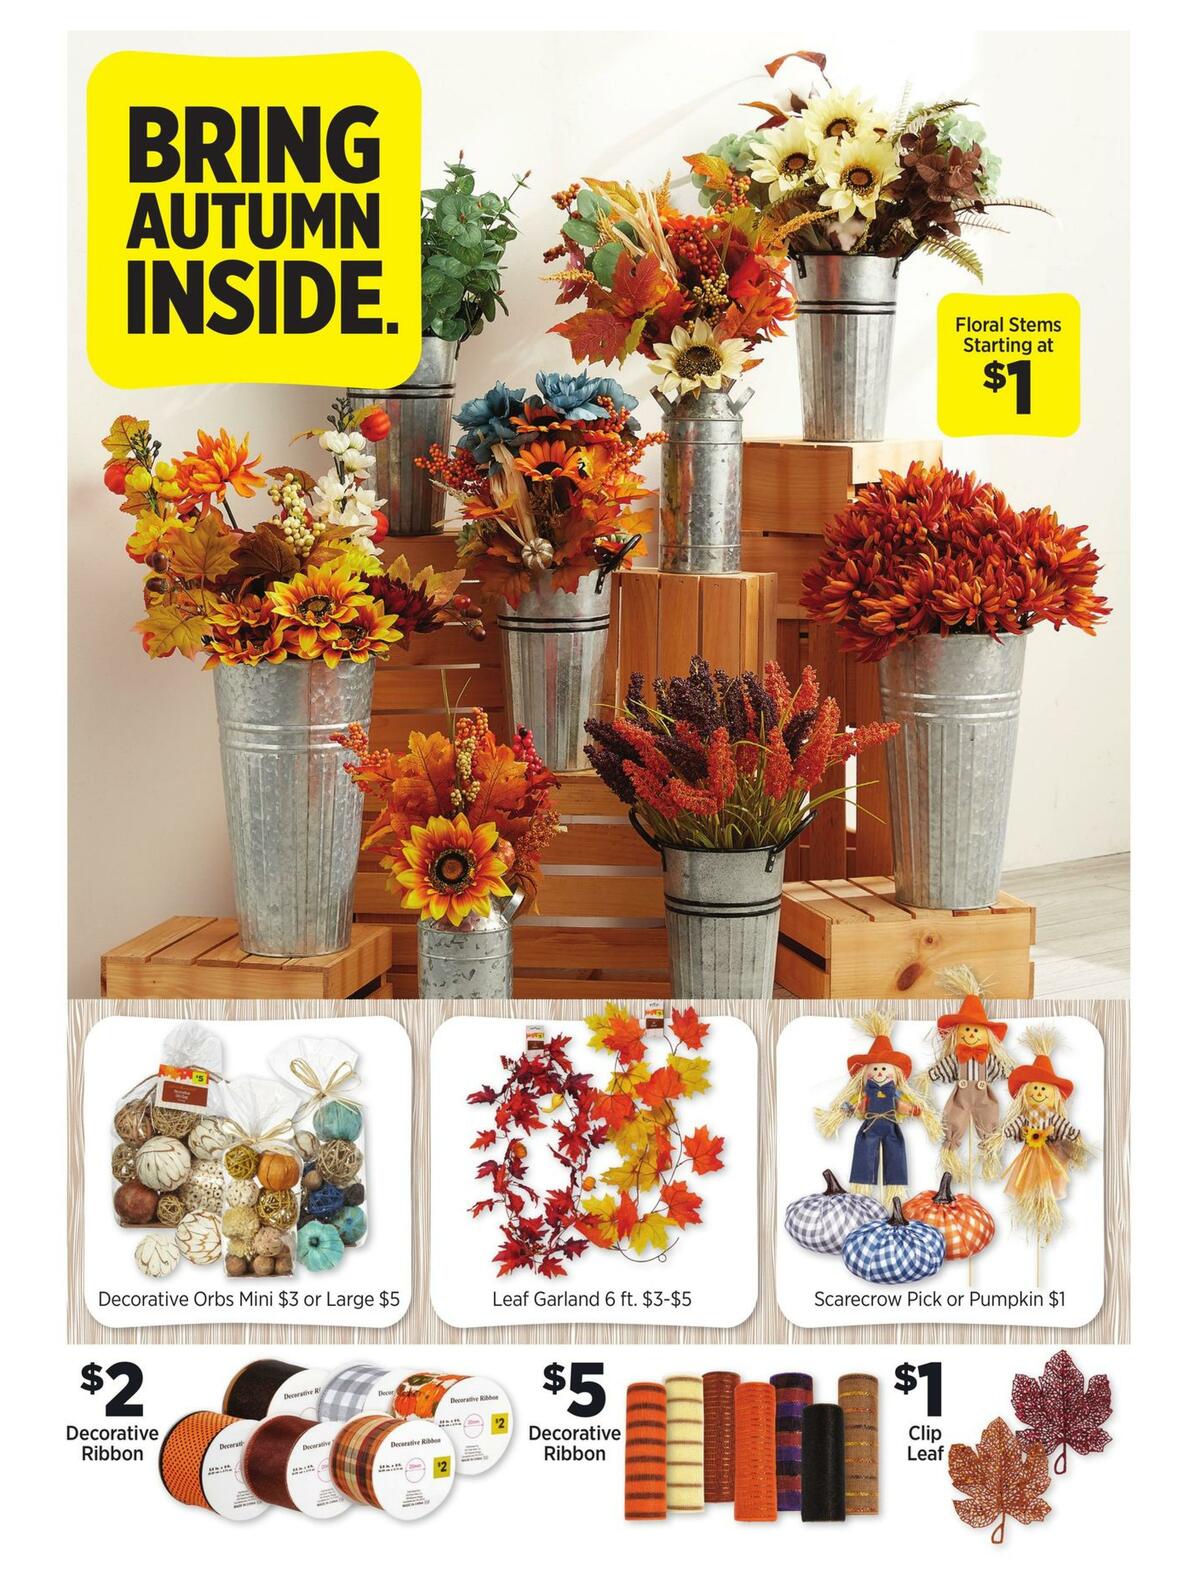 Dollar General Fall Decor for the Home. Weekly Ads and Circulars for